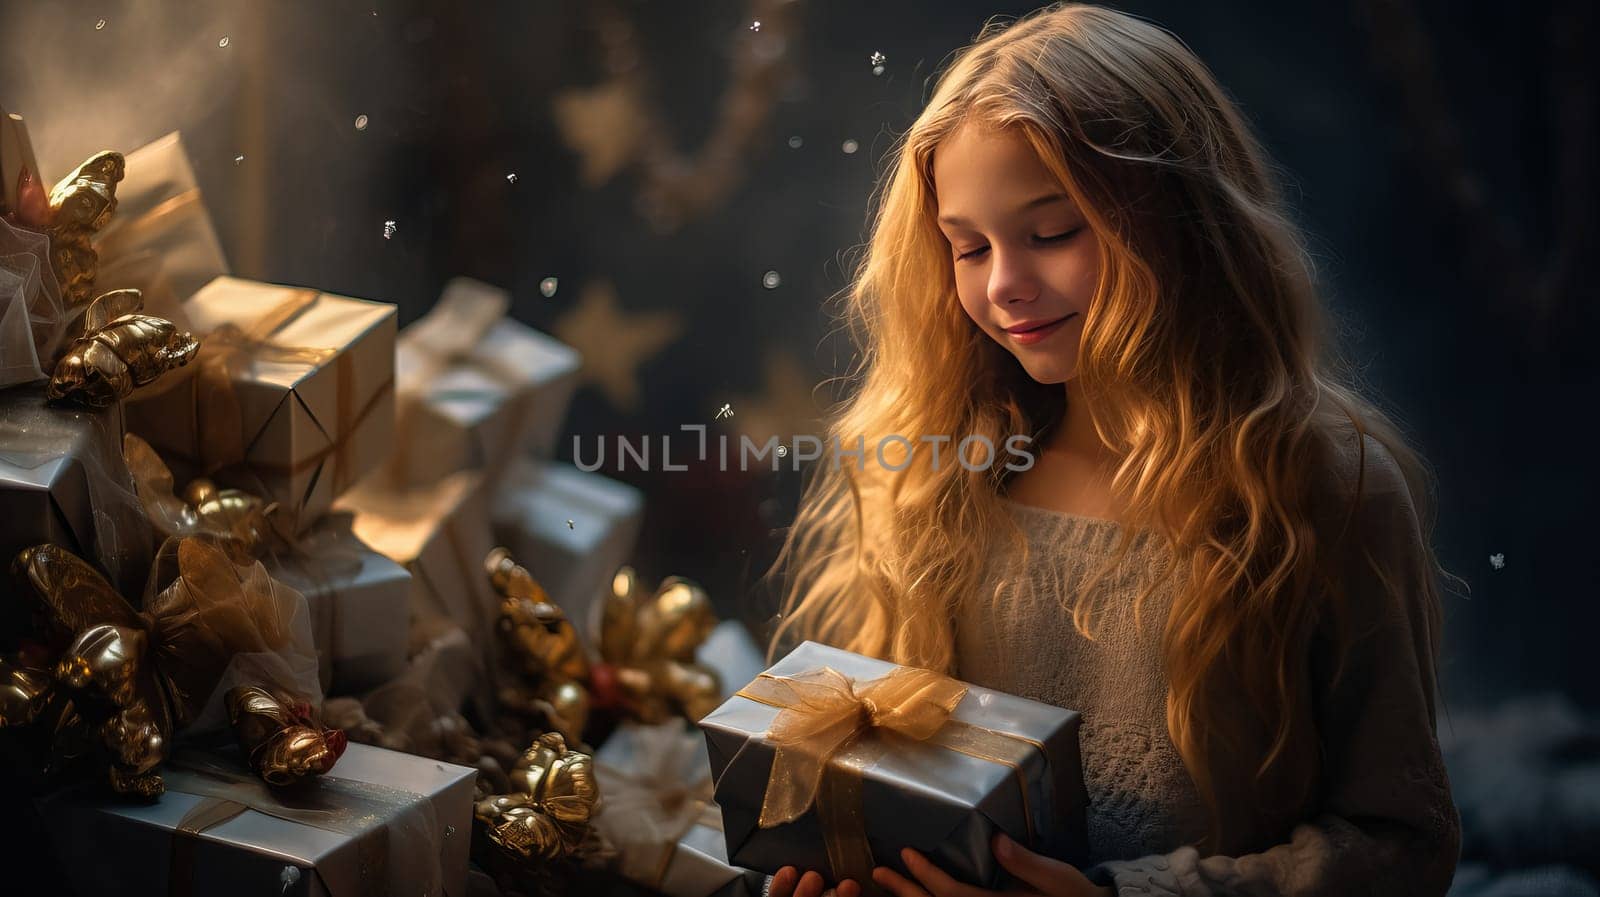 A young girl is unwrapping a Christmas gift surrounded by a tableware of presents.